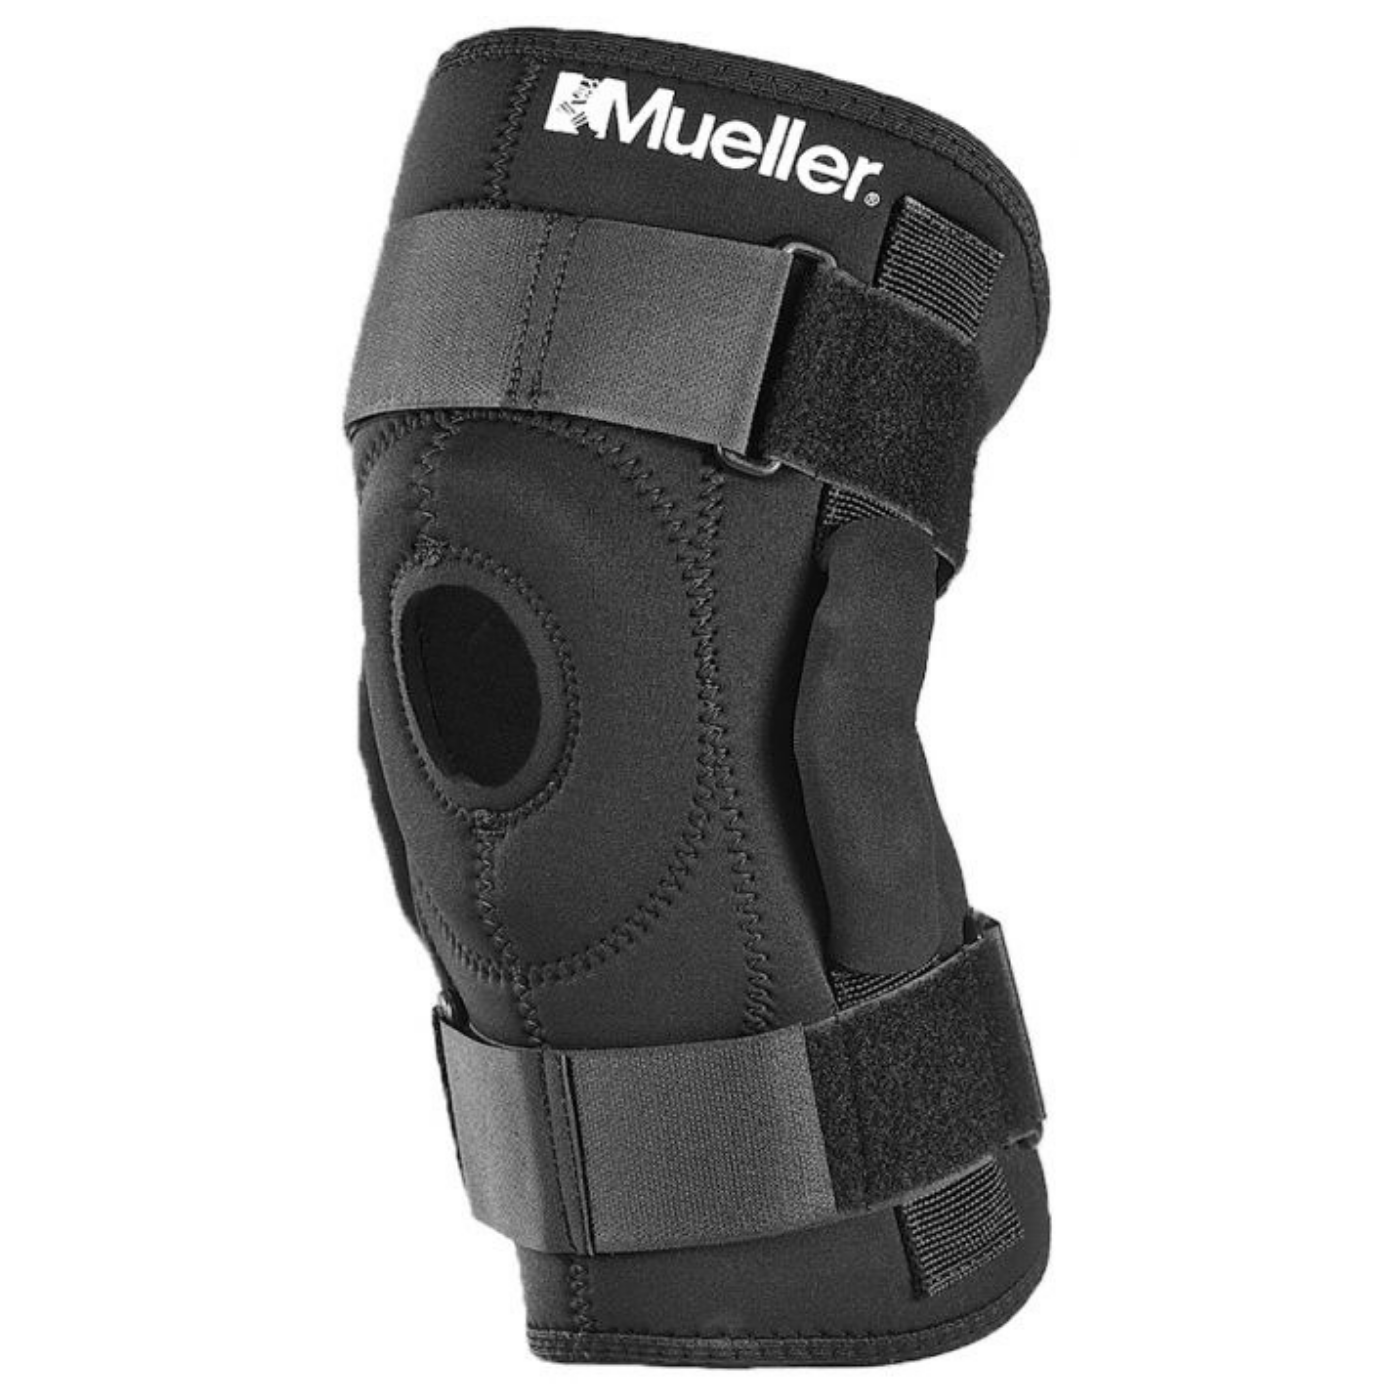 Hinged Knee Brace product only